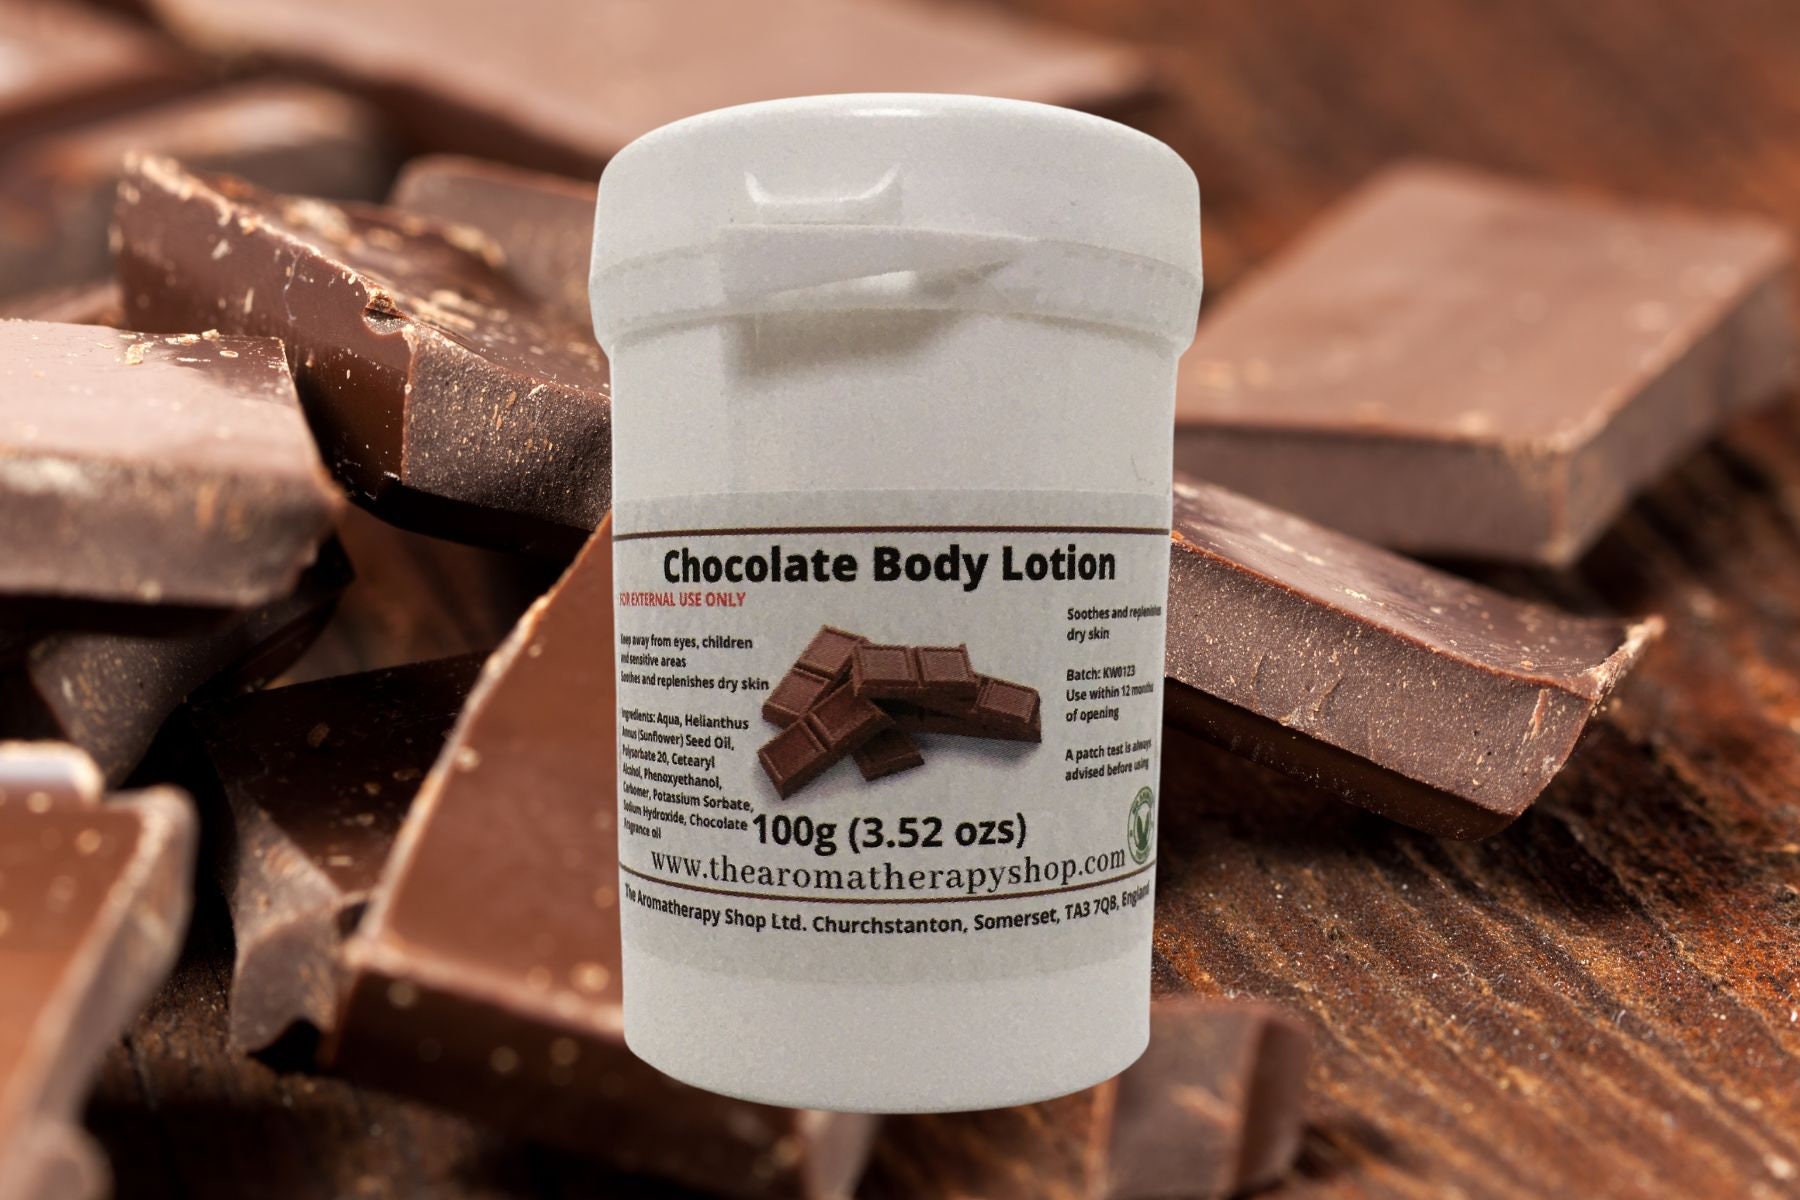 Buy Edible Chocolate Body Paint Online in India 